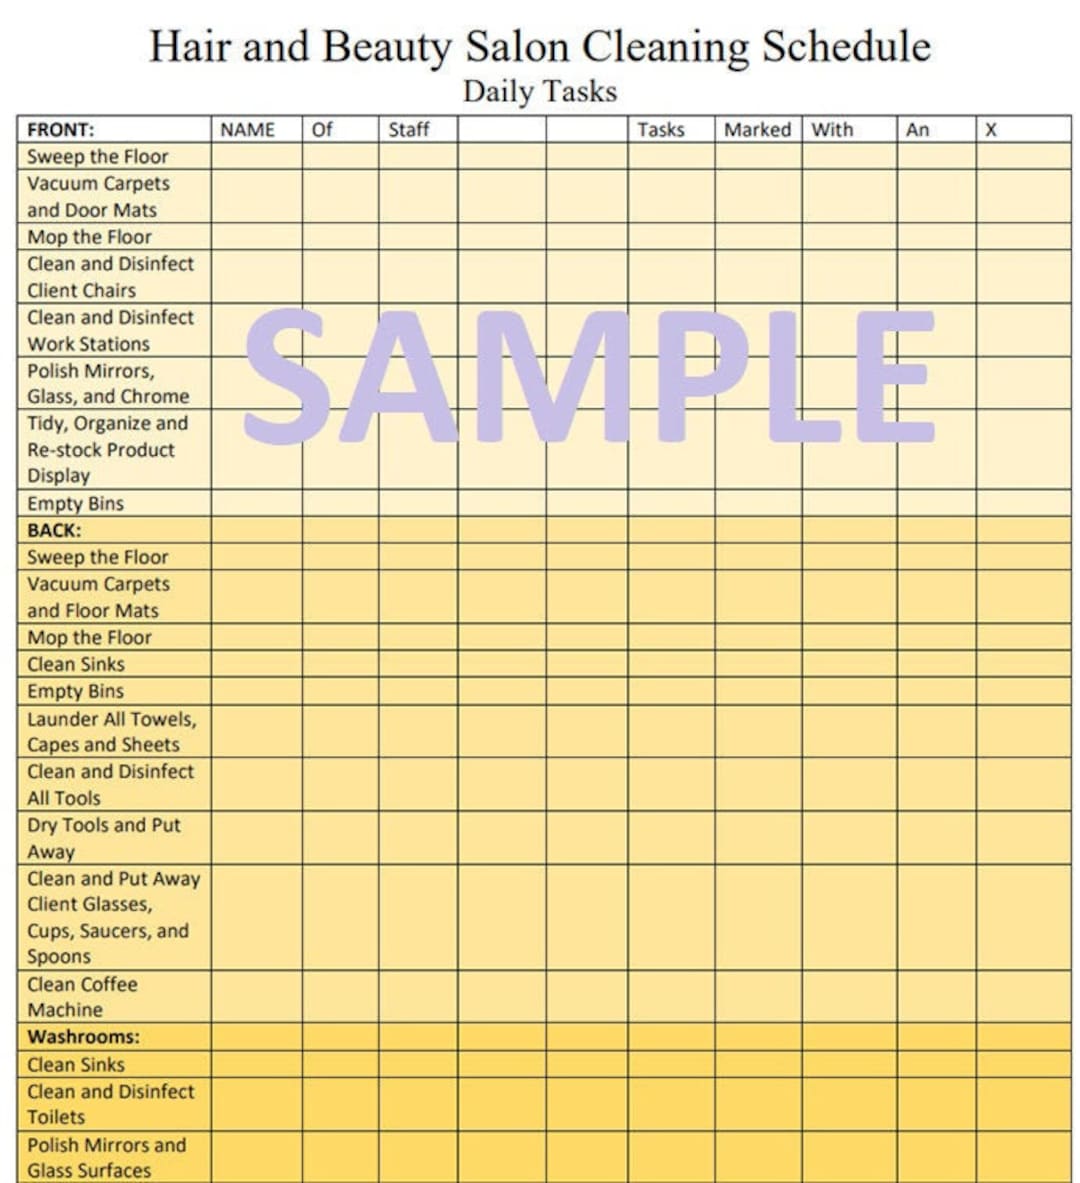 Trailer Towing Checklist Warning Decal, Sticker, Label, Safety FREE  Shipping | eBay